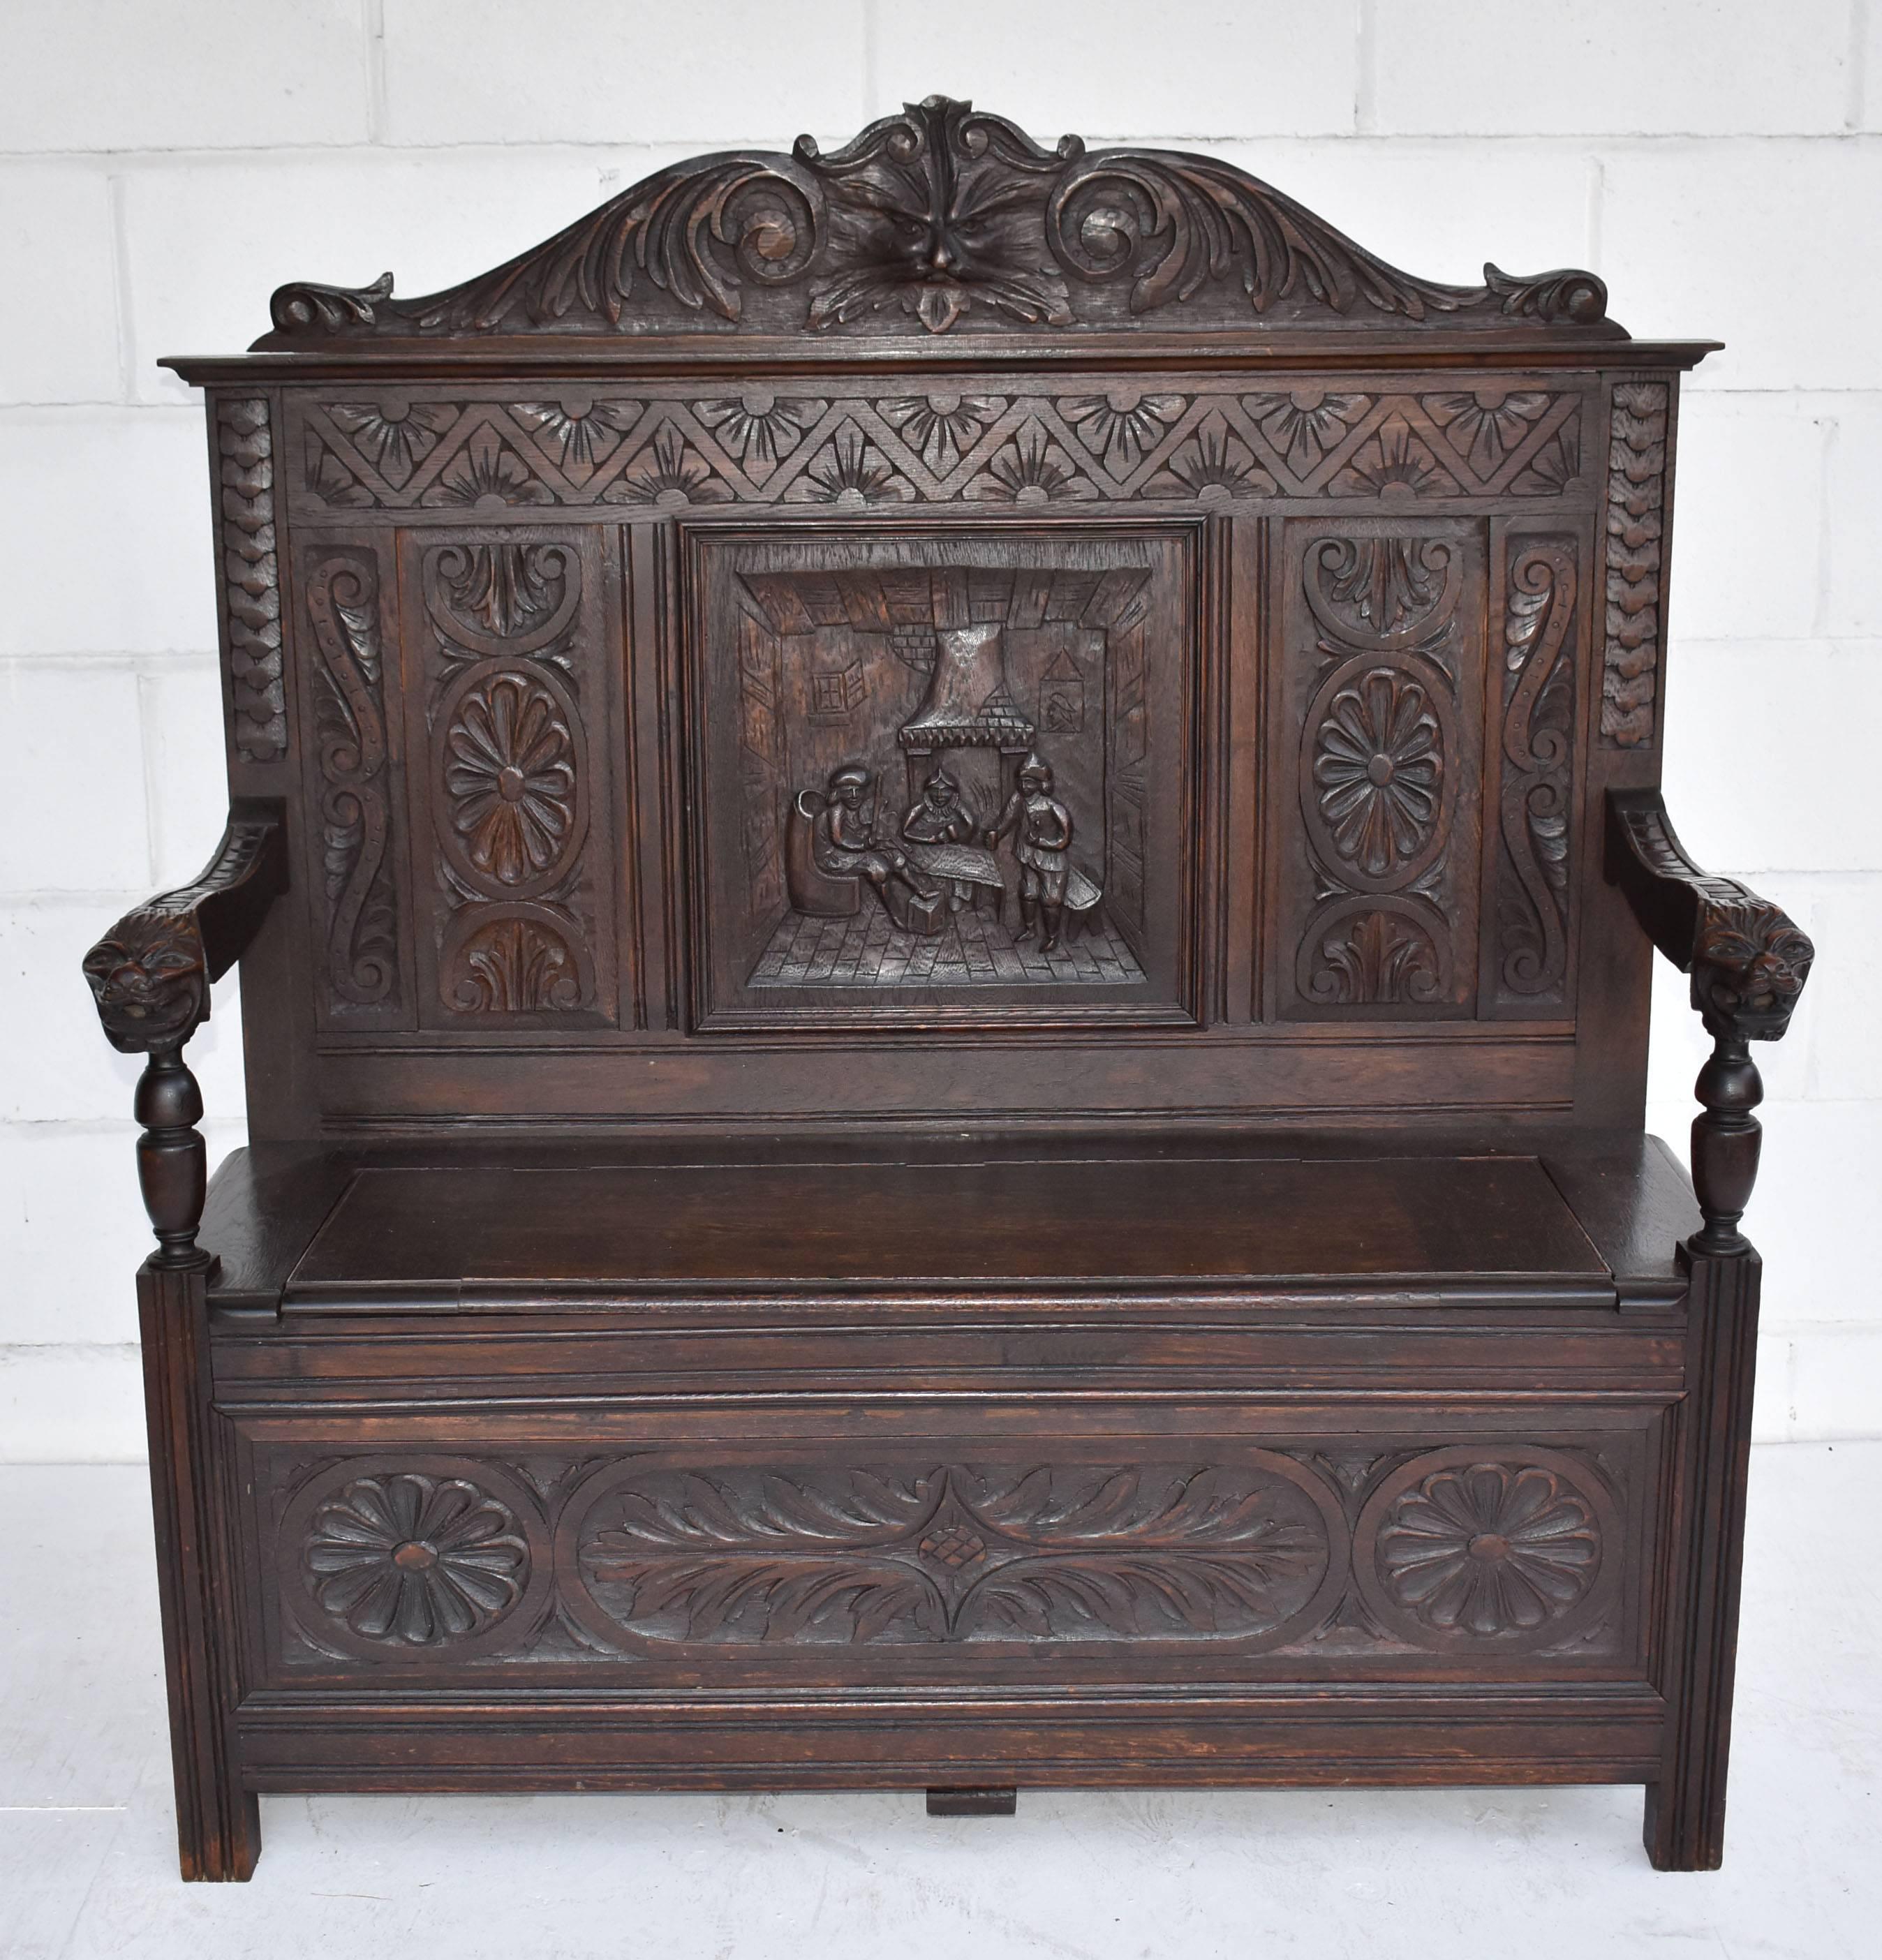 For sale is a good quality Victorian solid oak carved monk’s bench. The bench has an ornate pediment to the back with a carved mask, above three carved panels, the centre of which depicts a pub scene. Below this the seat has a rising lid, opening to